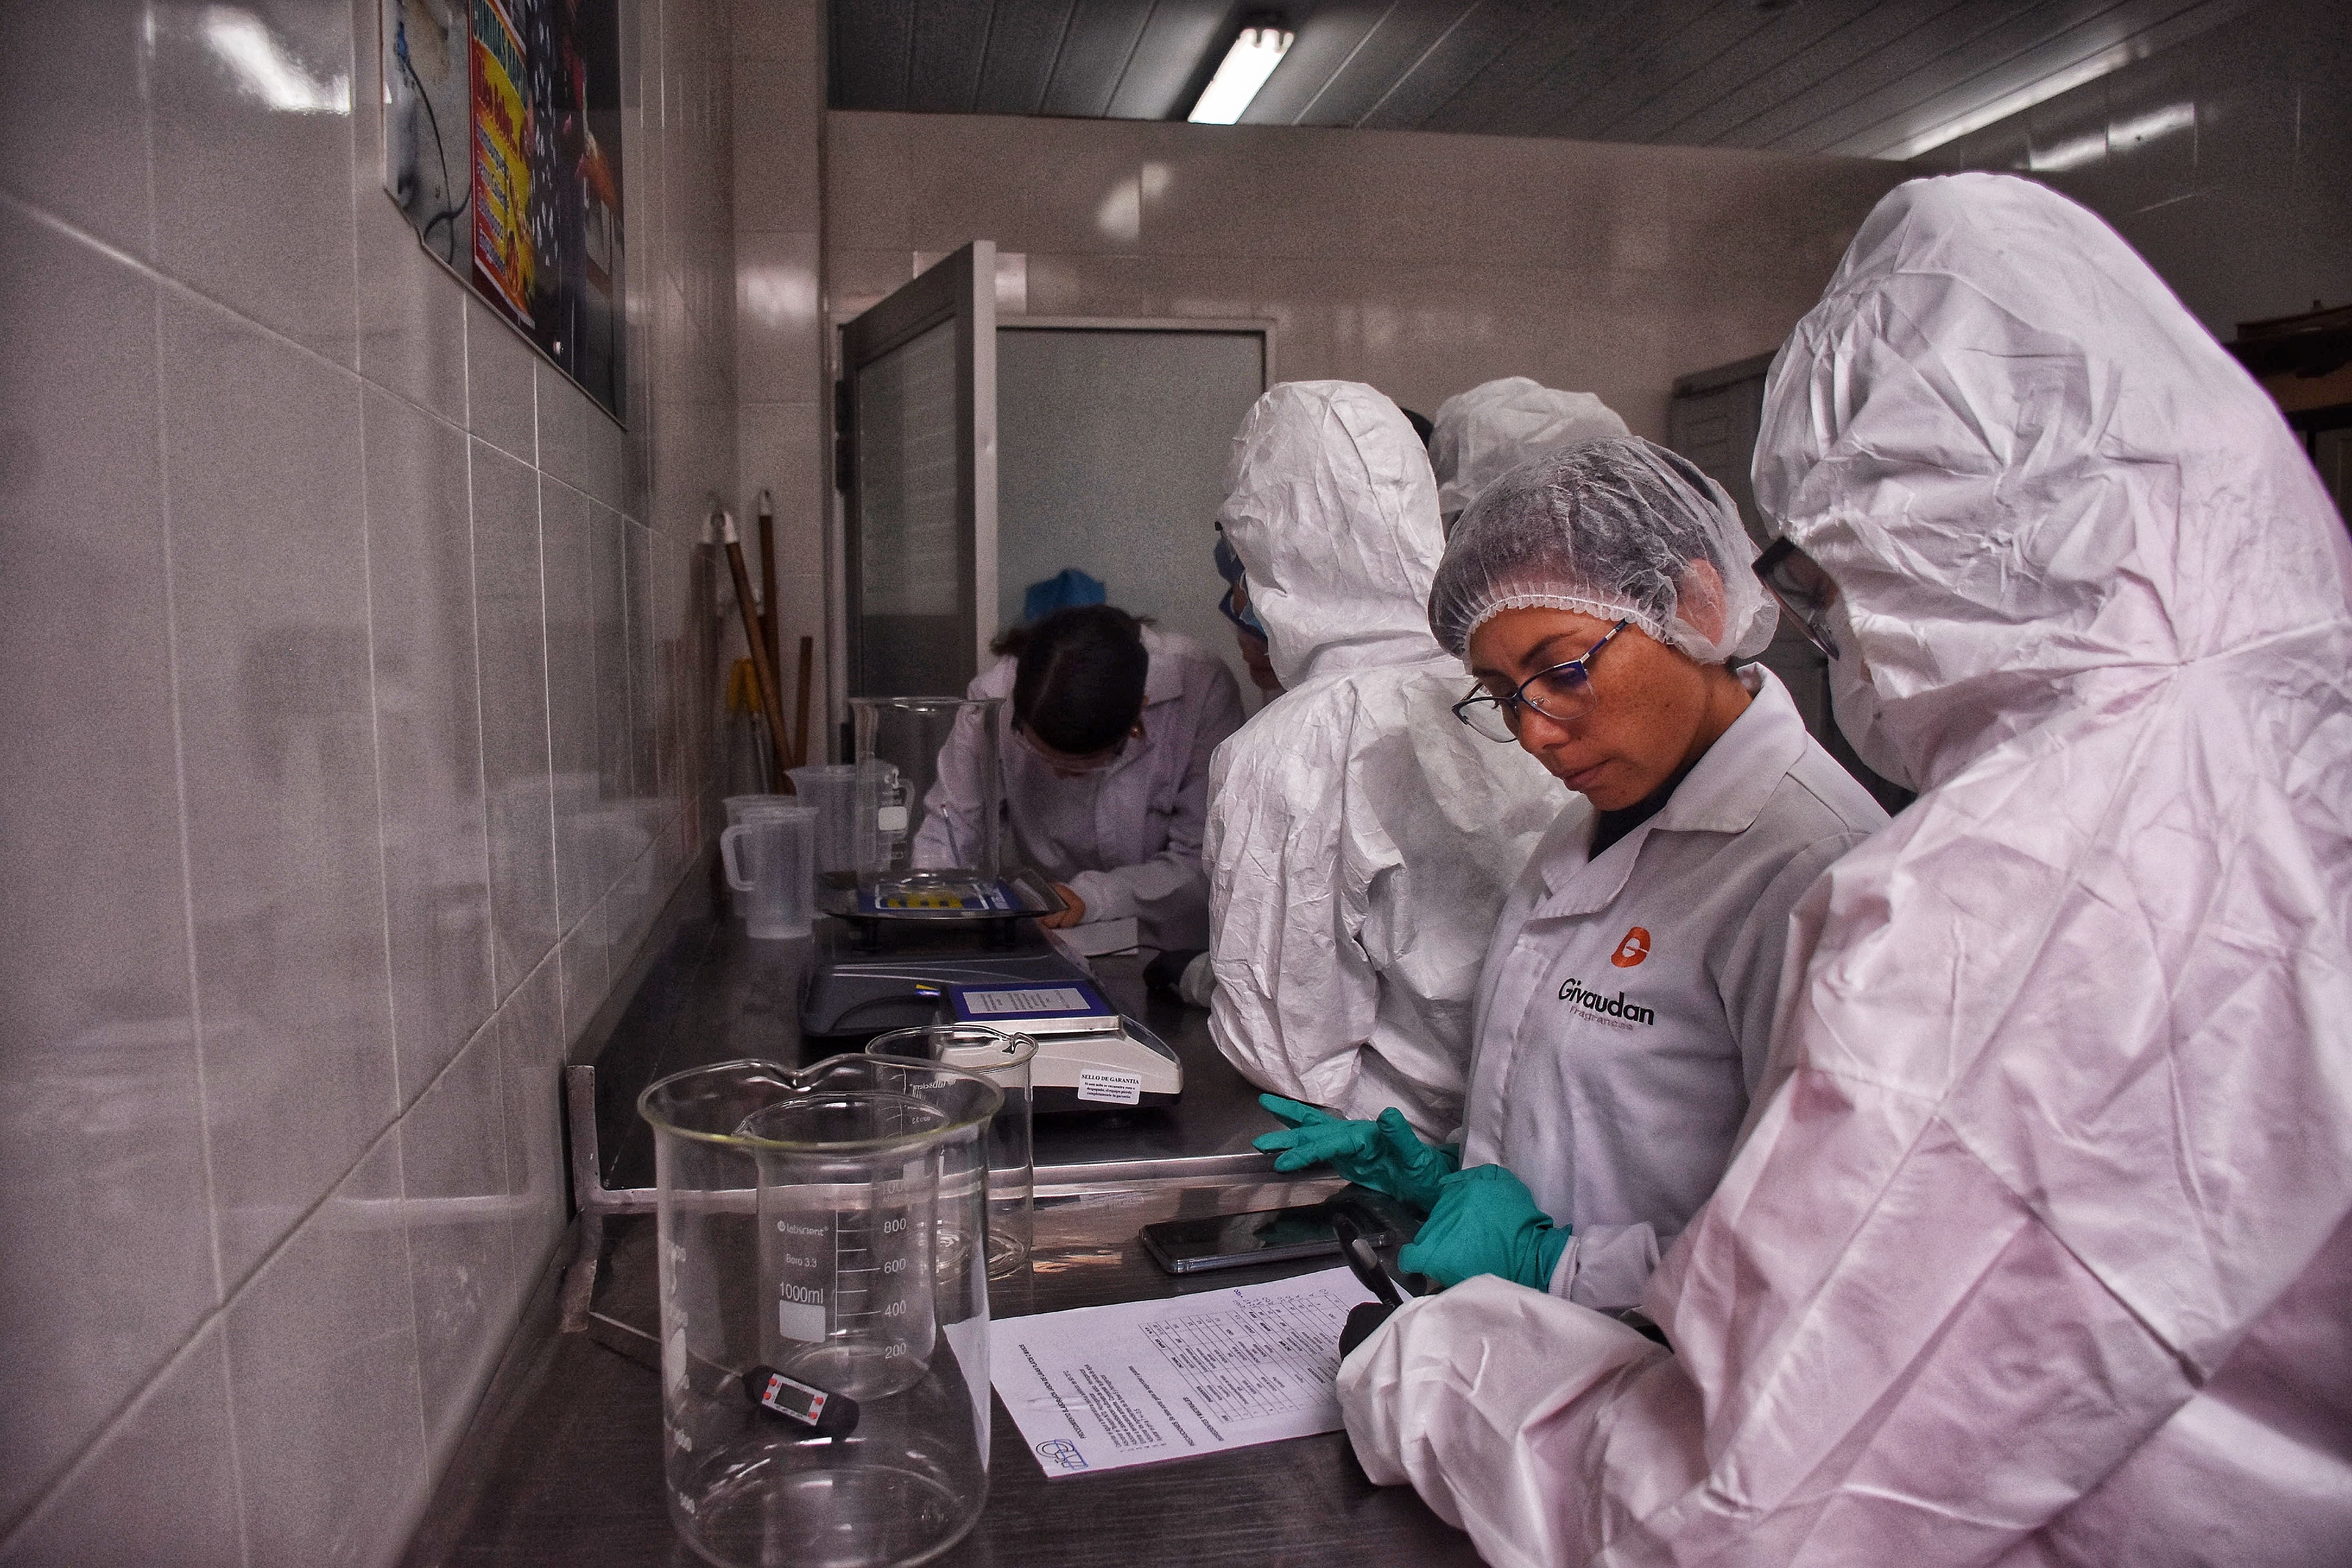 volunteers together with participants in a lab manufacturing cleaning products